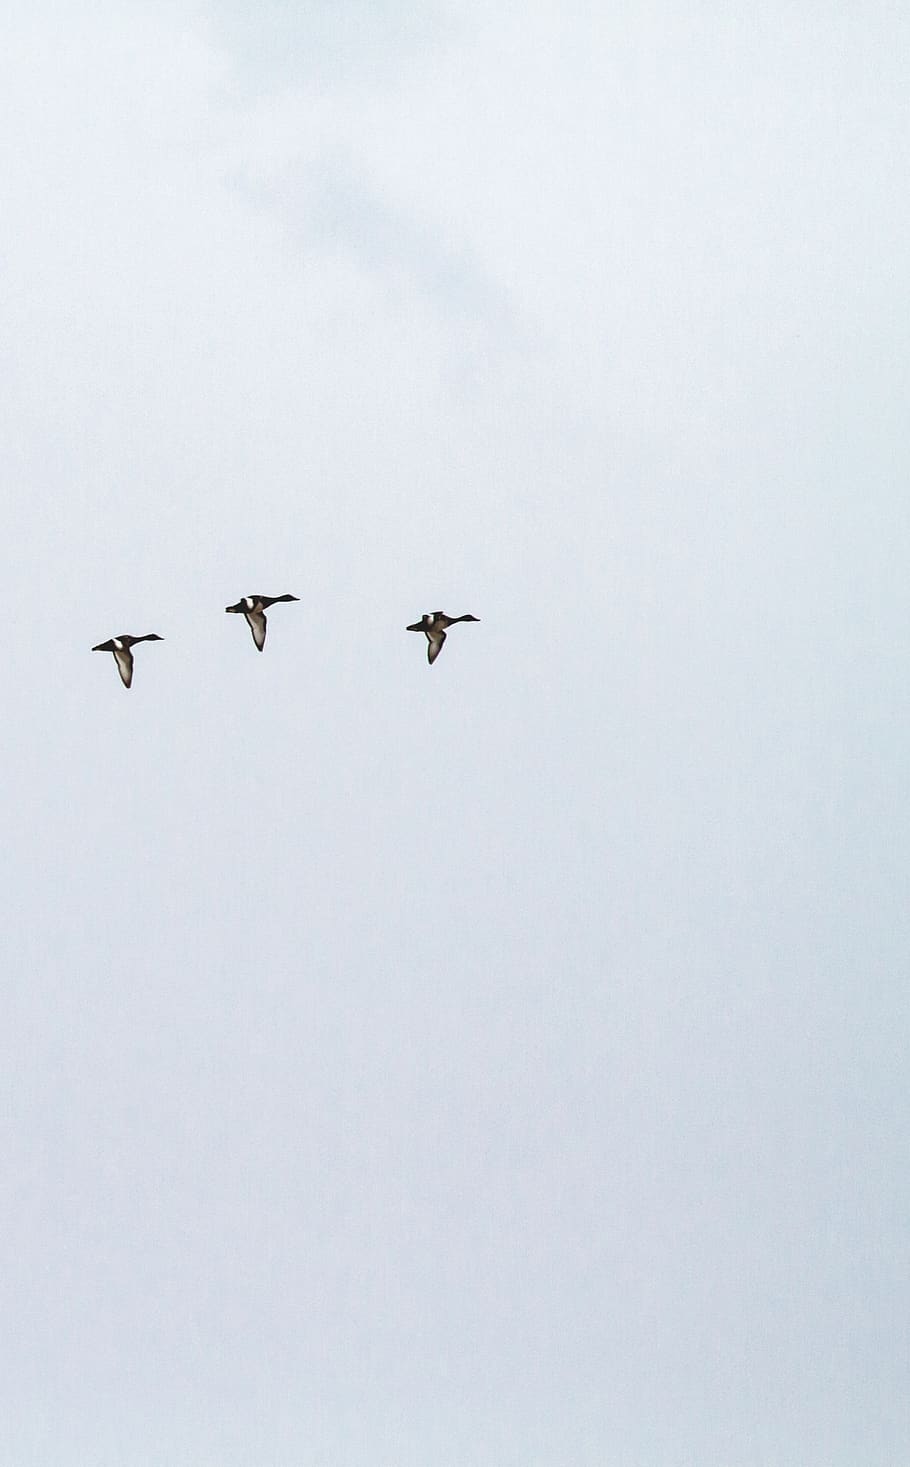 three ducks flying under the clouds during daytime, animal, ardeidae, HD wallpaper